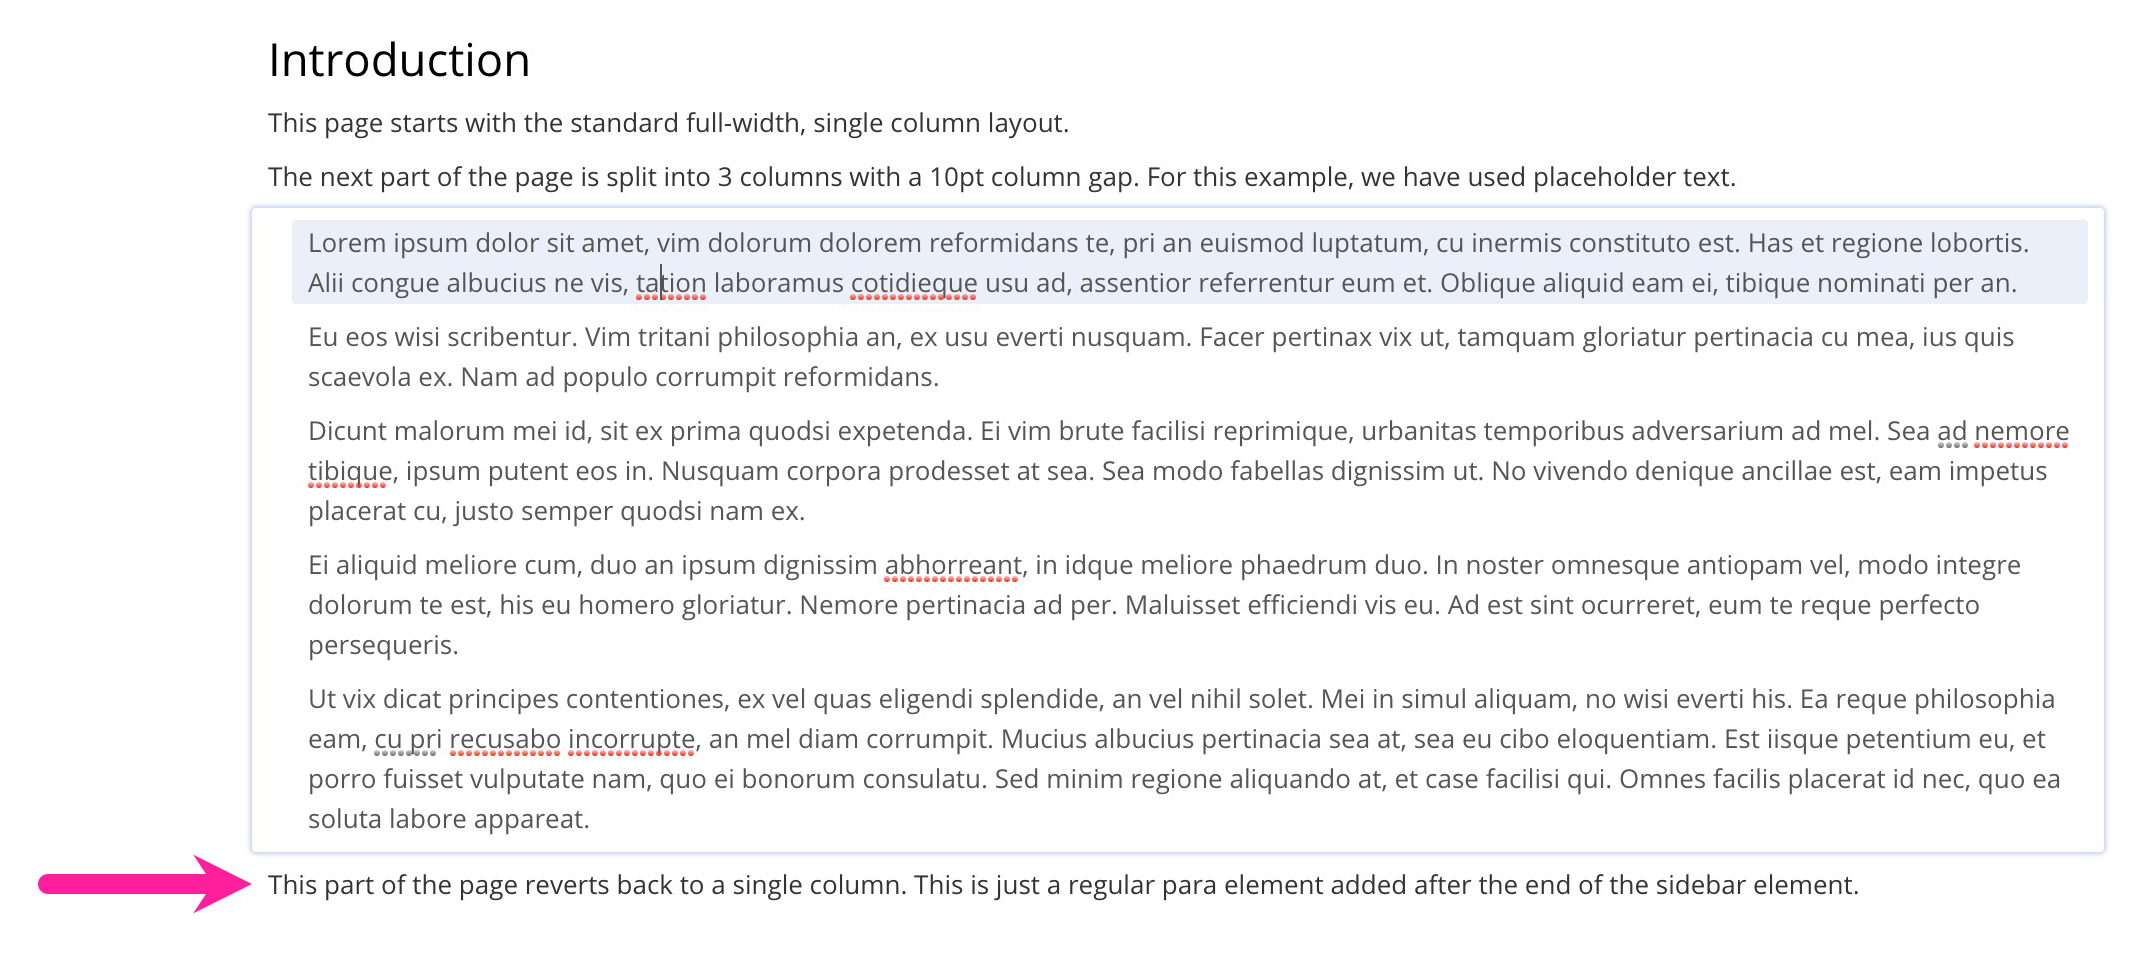 Topic with an introduction title and some paragraphs after it. After the paragraphs there is a sidebar and inside that there is some placeholder text. An arrow points to the placeholder text in the sidebar.